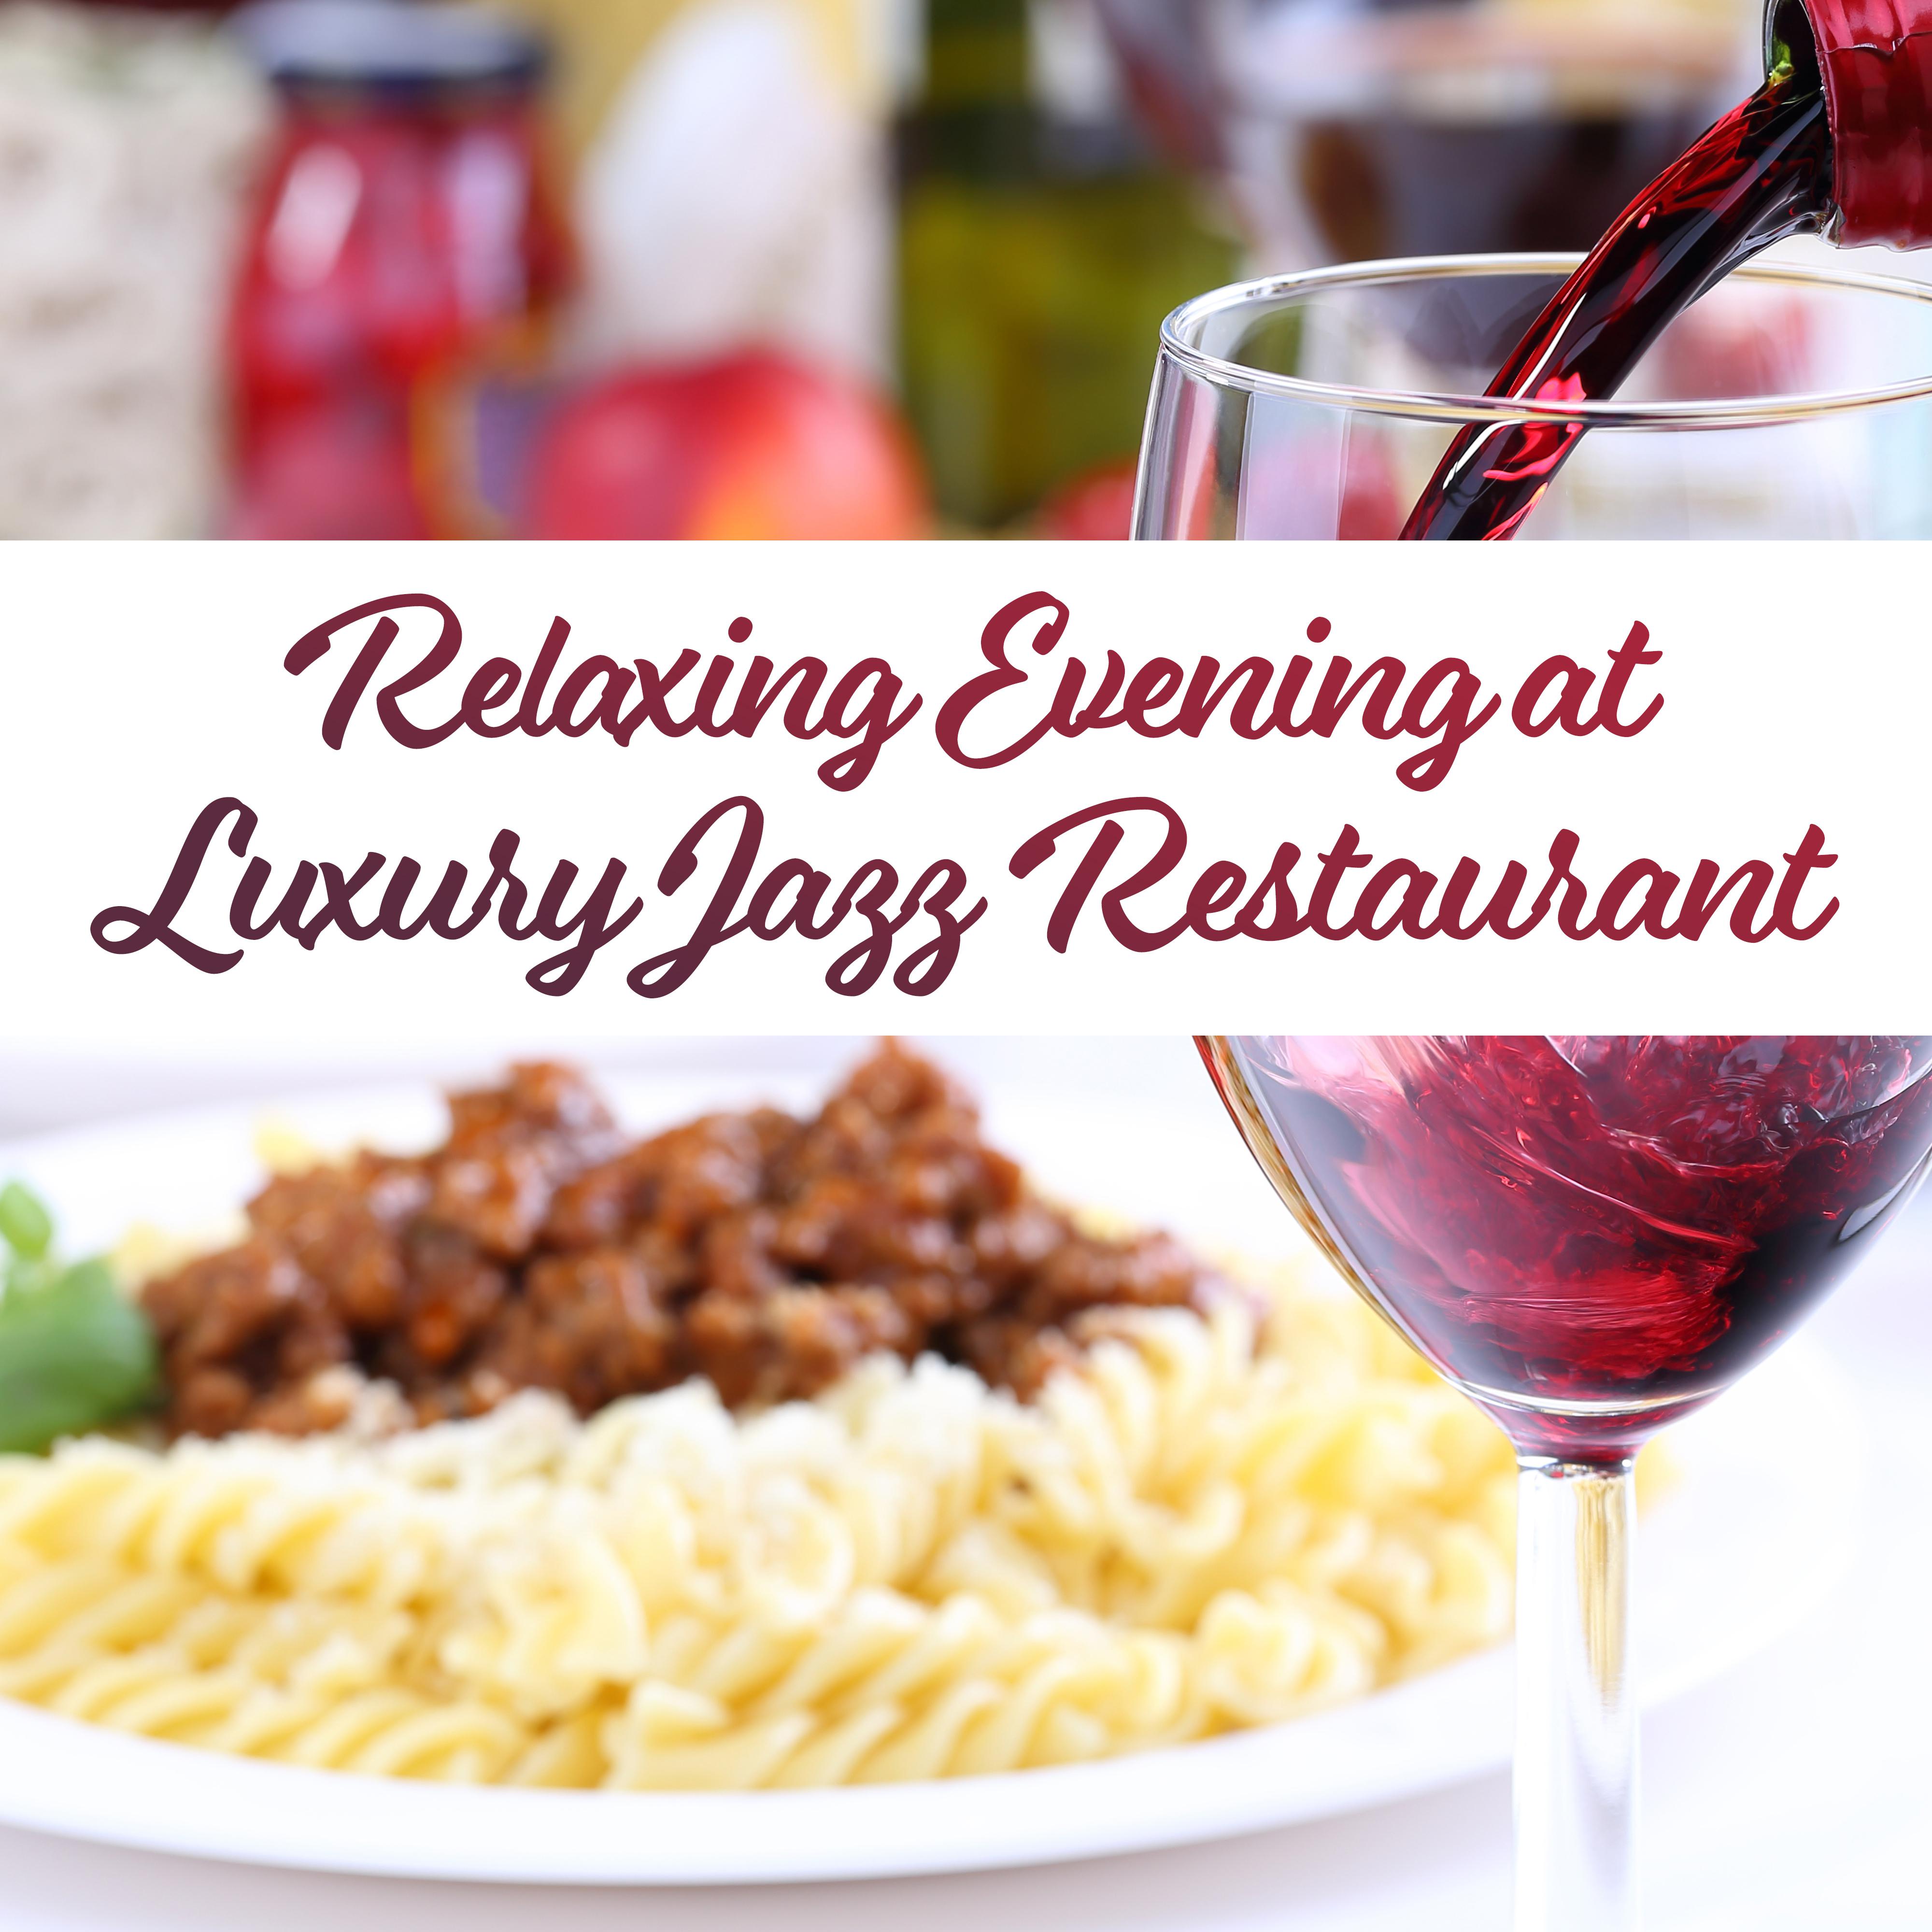 Relaxing Evening at Luxury Jazz Restaurant: 15 Smooth Jazz 2019 Vintage Songs for Nice Time Spending with Wine, Good Food & Friends